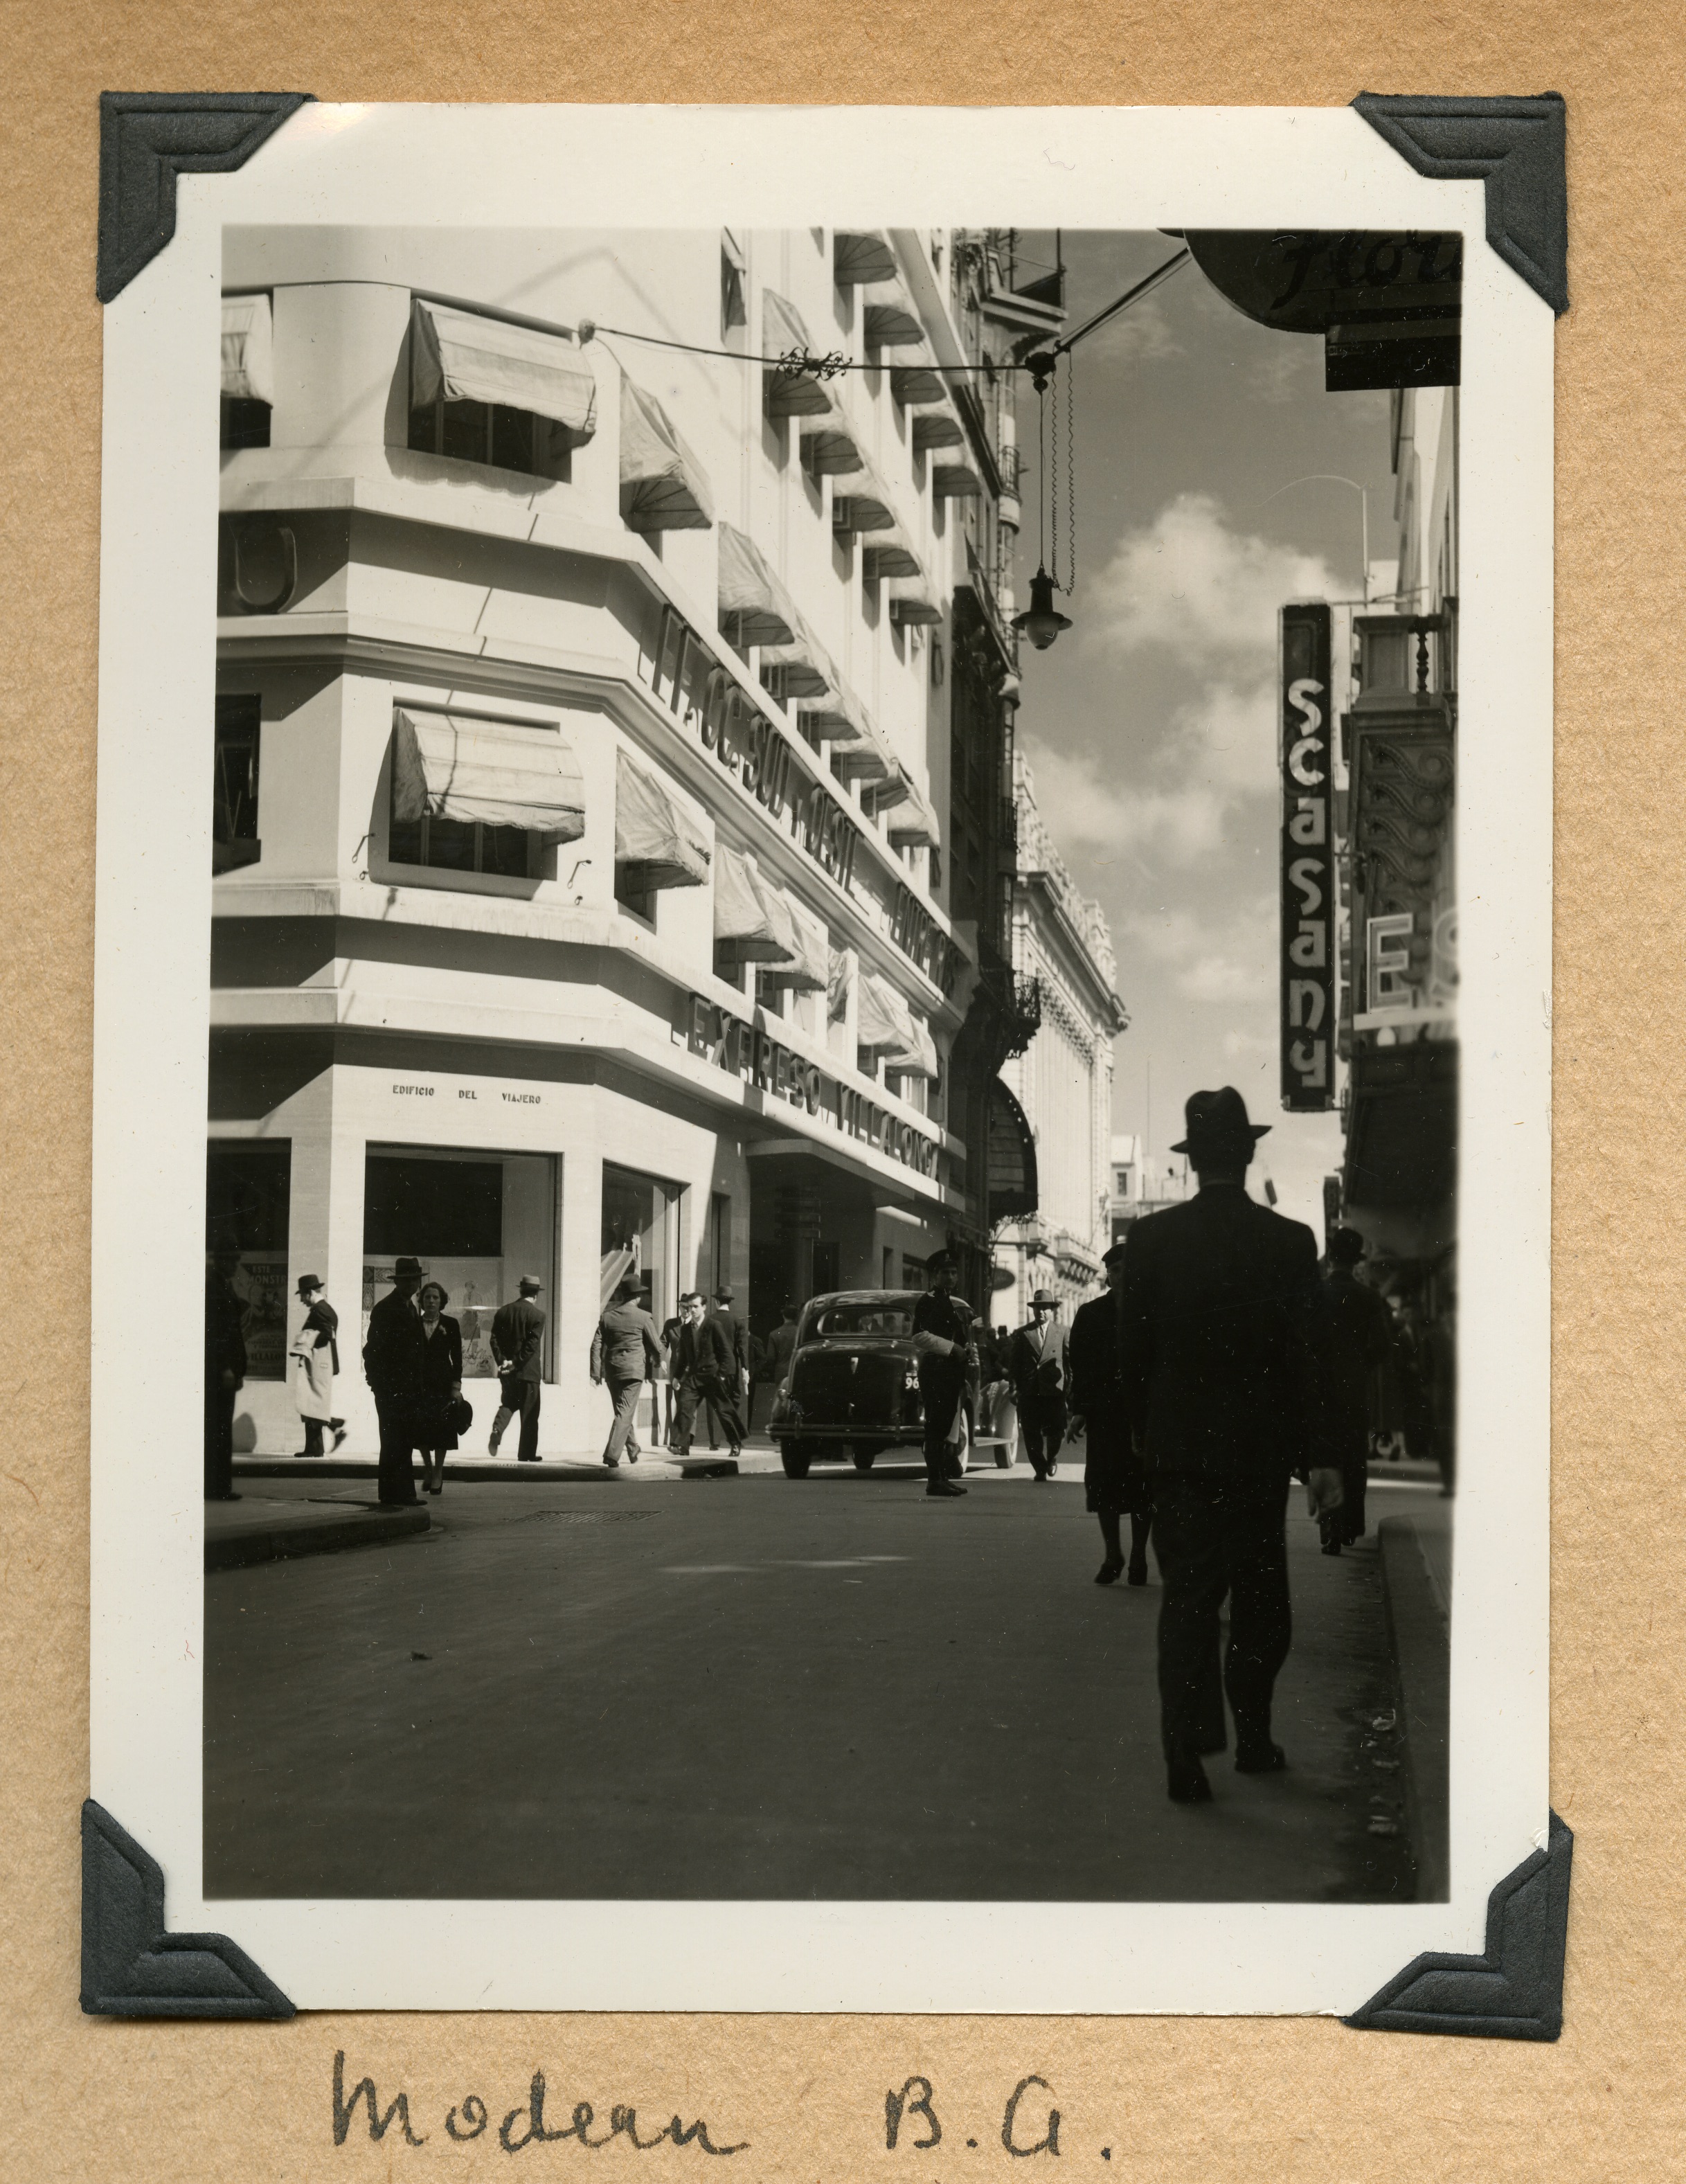 Image in a scrapbook of a busy street with people walking on sidewalks and on the street. The people